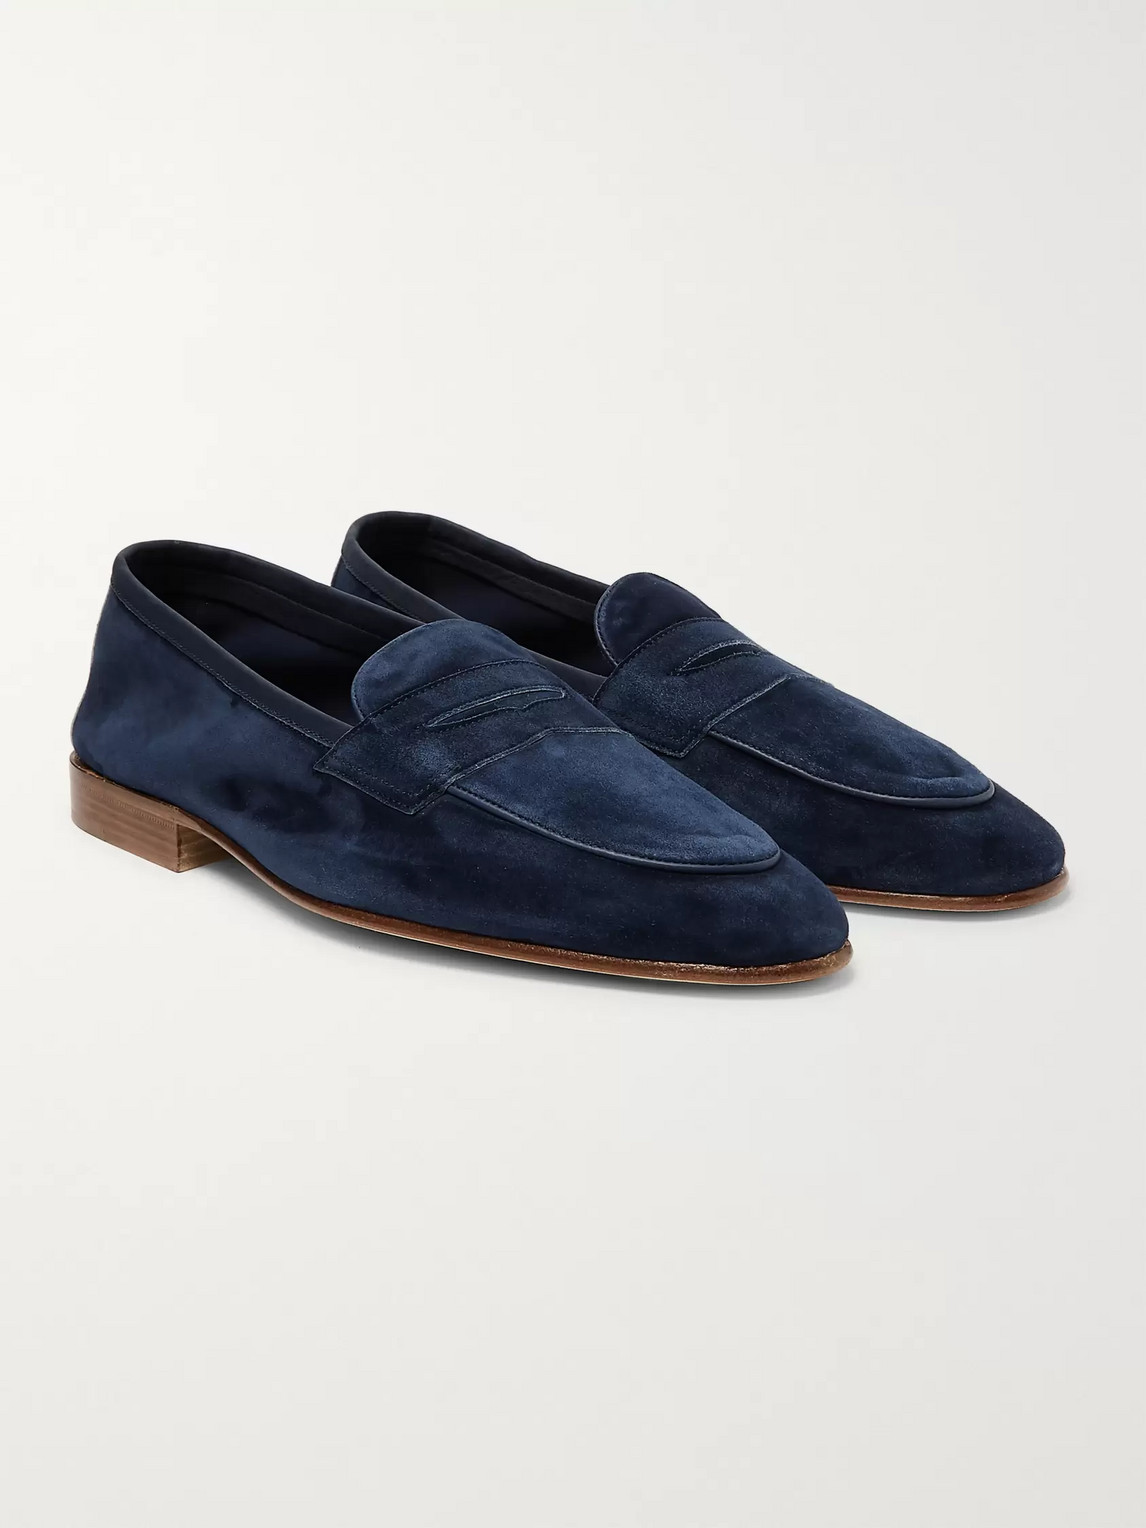 EDWARD GREEN POLPERRO LEATHER-TRIMMED SUEDE PENNY LOAFERS